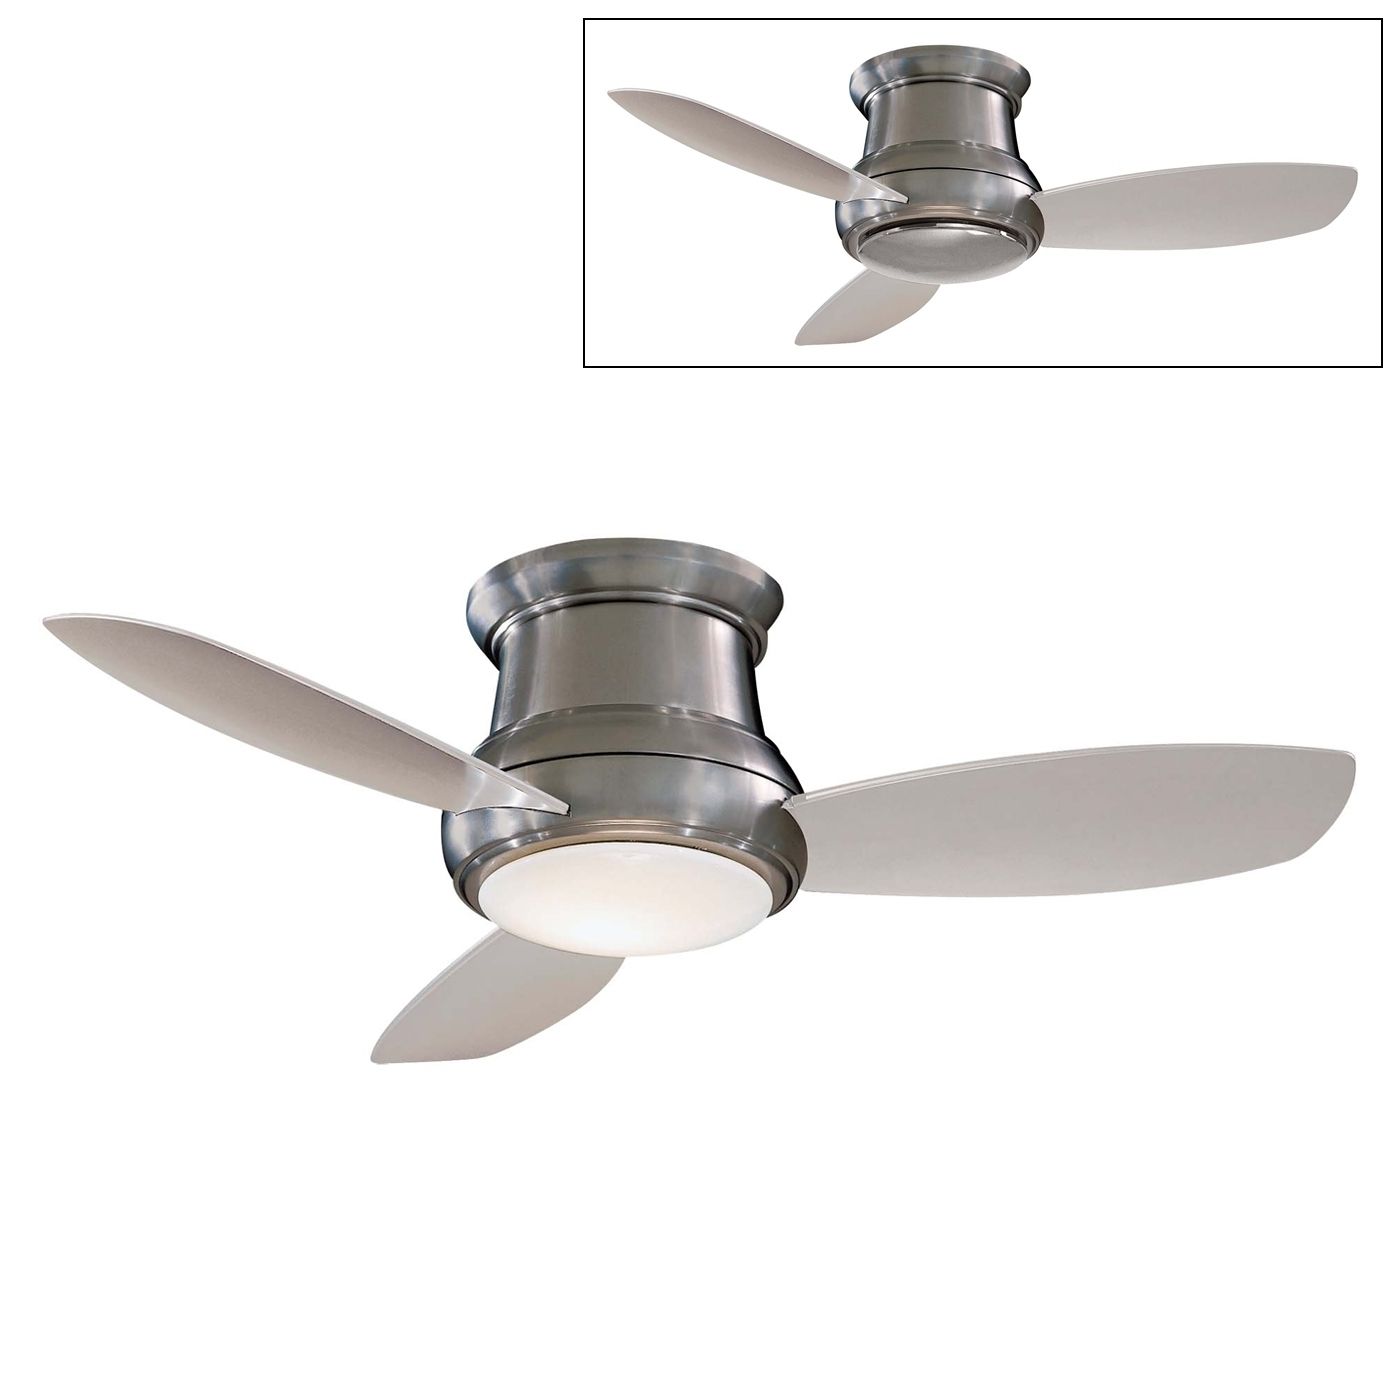 Newest Ceiling Fan: Astounding Menards Ceiling Fans For Home Lowes Ceiling With Regard To Outdoor Ceiling Fans At Menards (View 7 of 20)